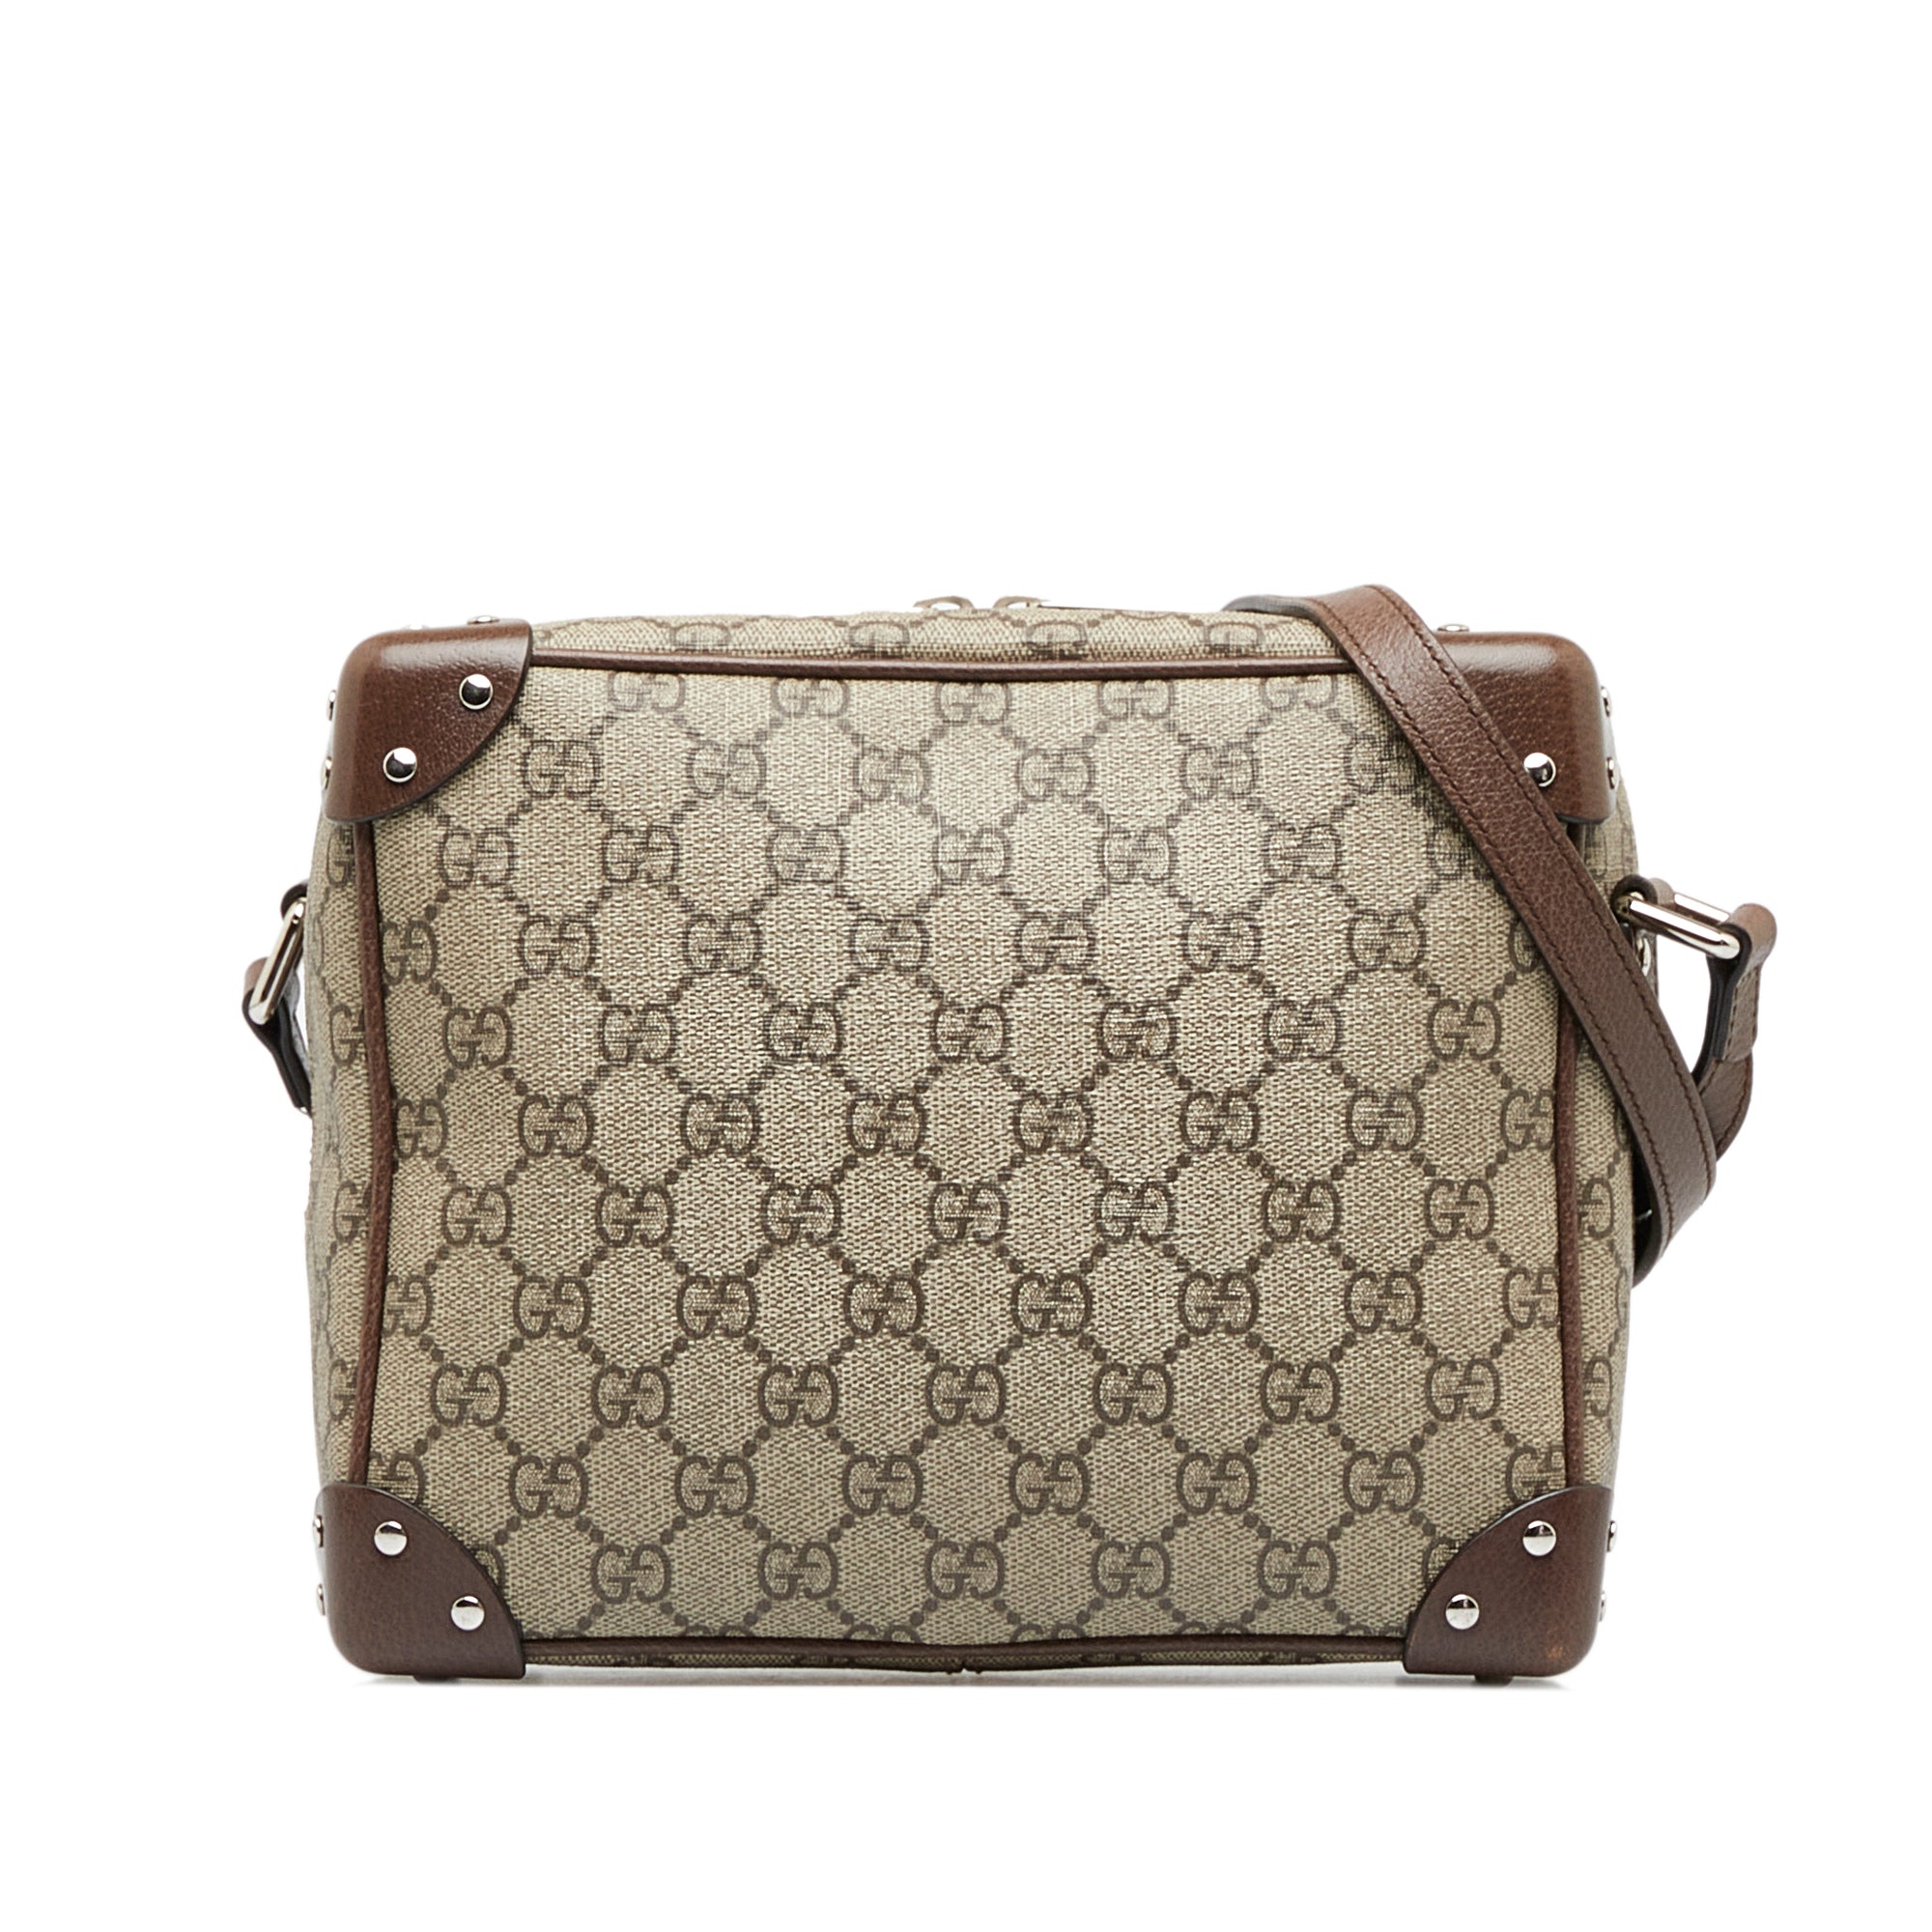 Gucci Hobo Monogram GG Supreme Large Light Brown in Coated Canvas